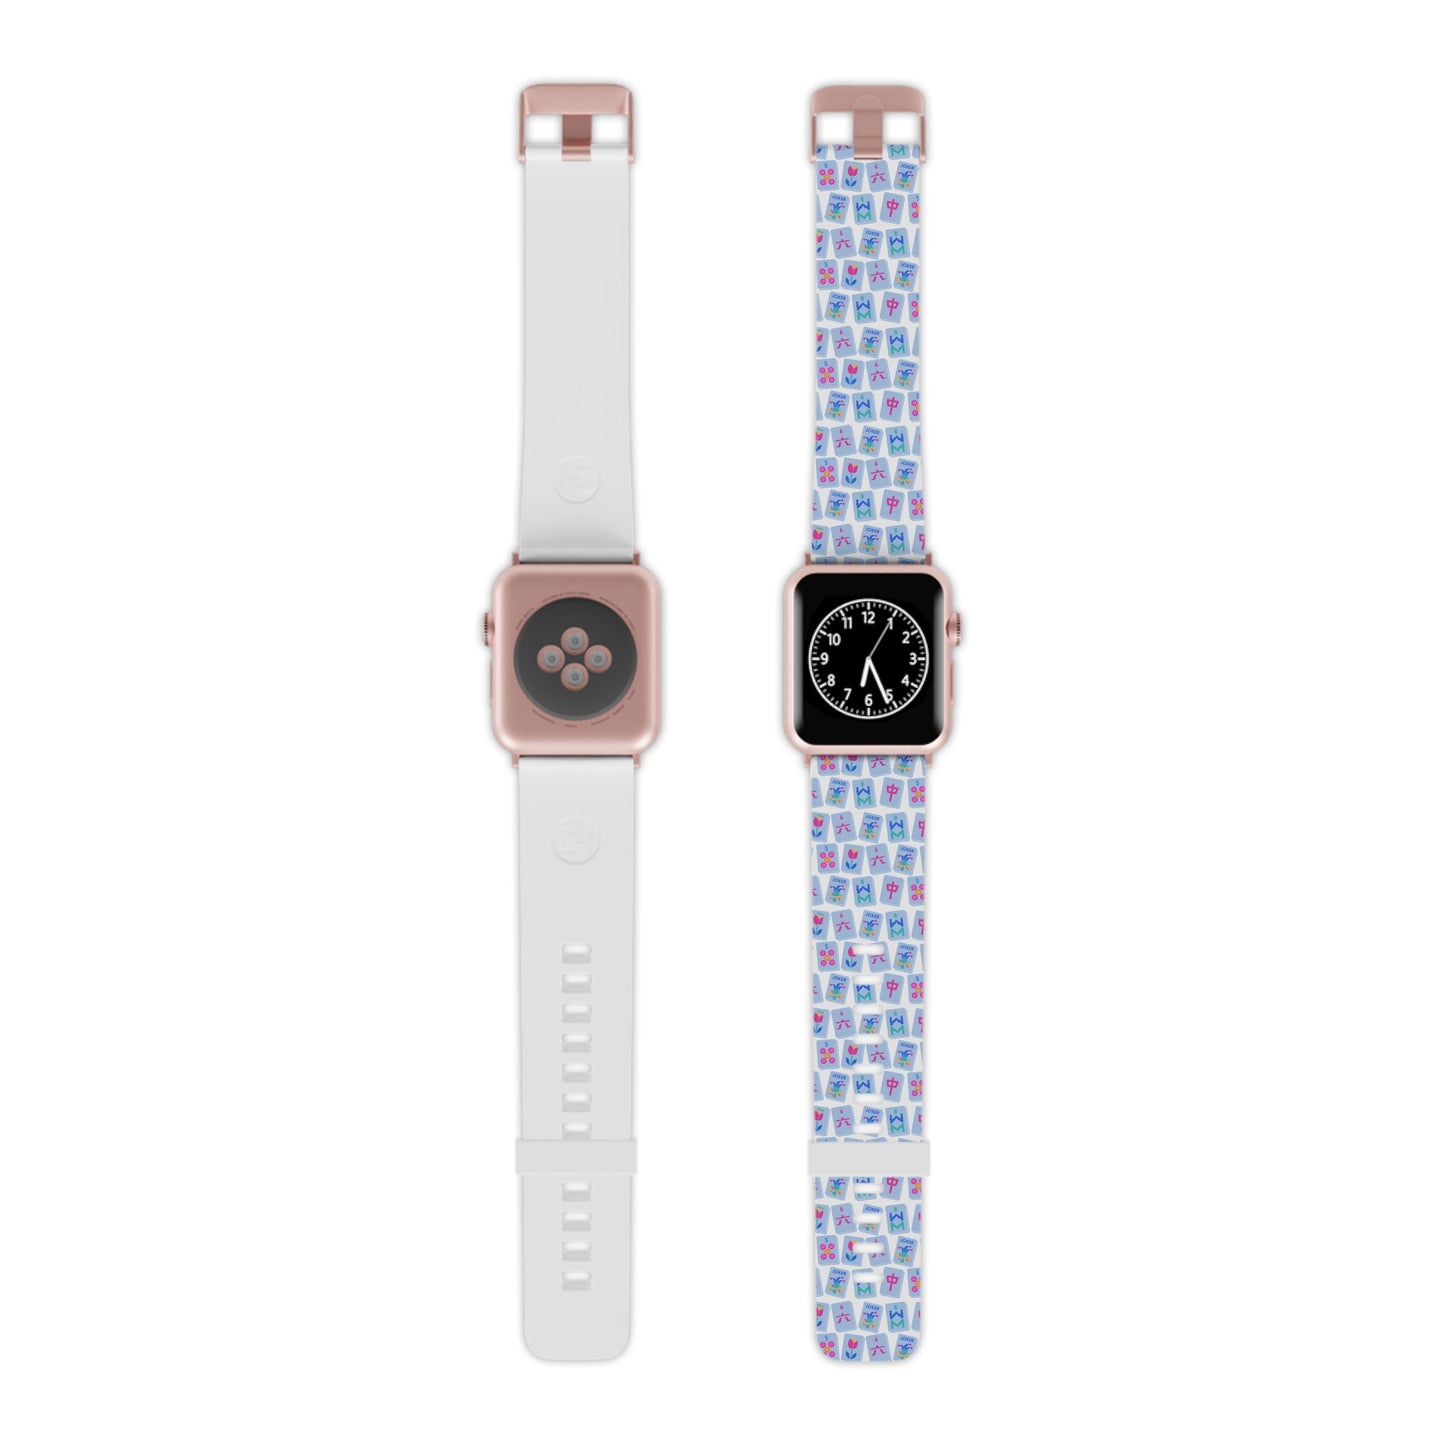 Mahjong Watch Band for Apple Watch. Colorful Mahjongg Tile Pattern with Dragon, Dot and Flower Tiles. Great Gift for Mah-Jongg Players.